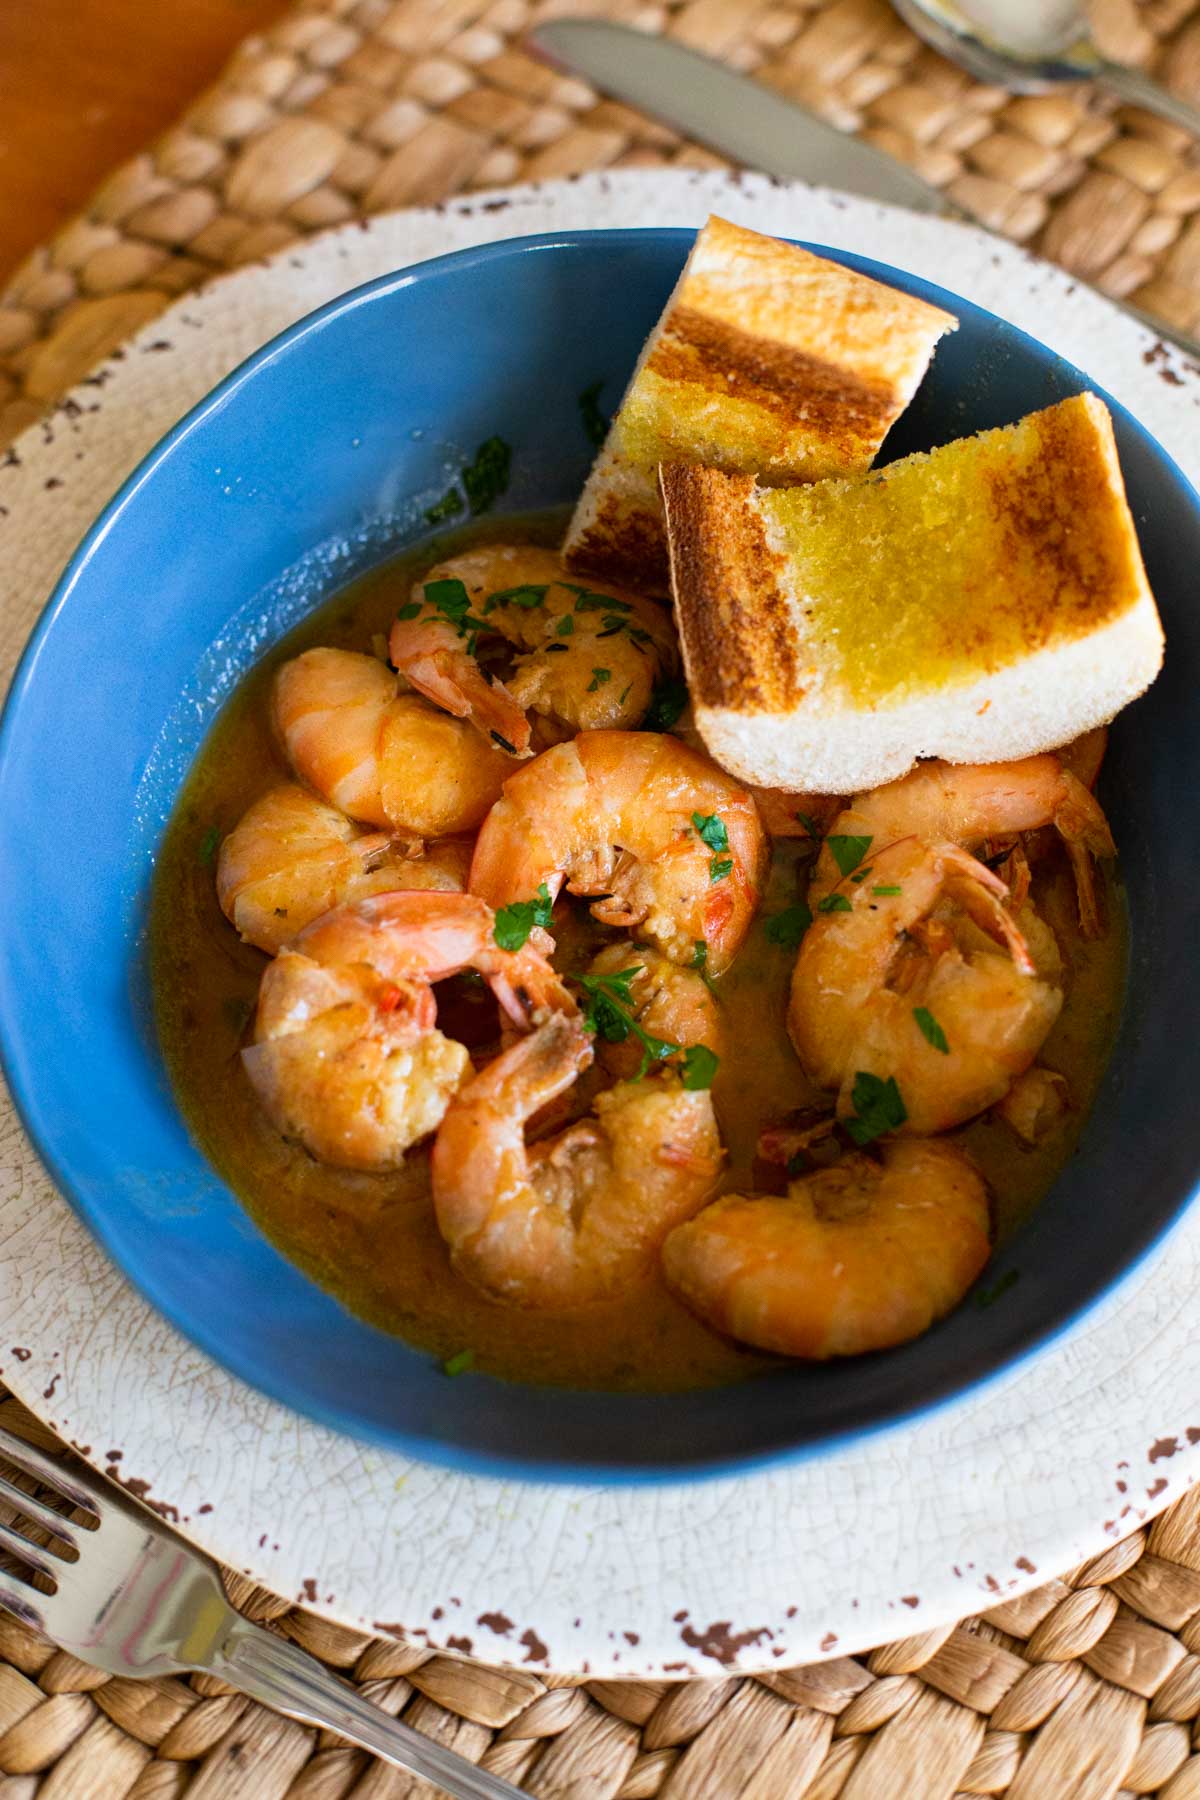 A big bowl of shrimp in butter sauce has garlic toast for dunking.